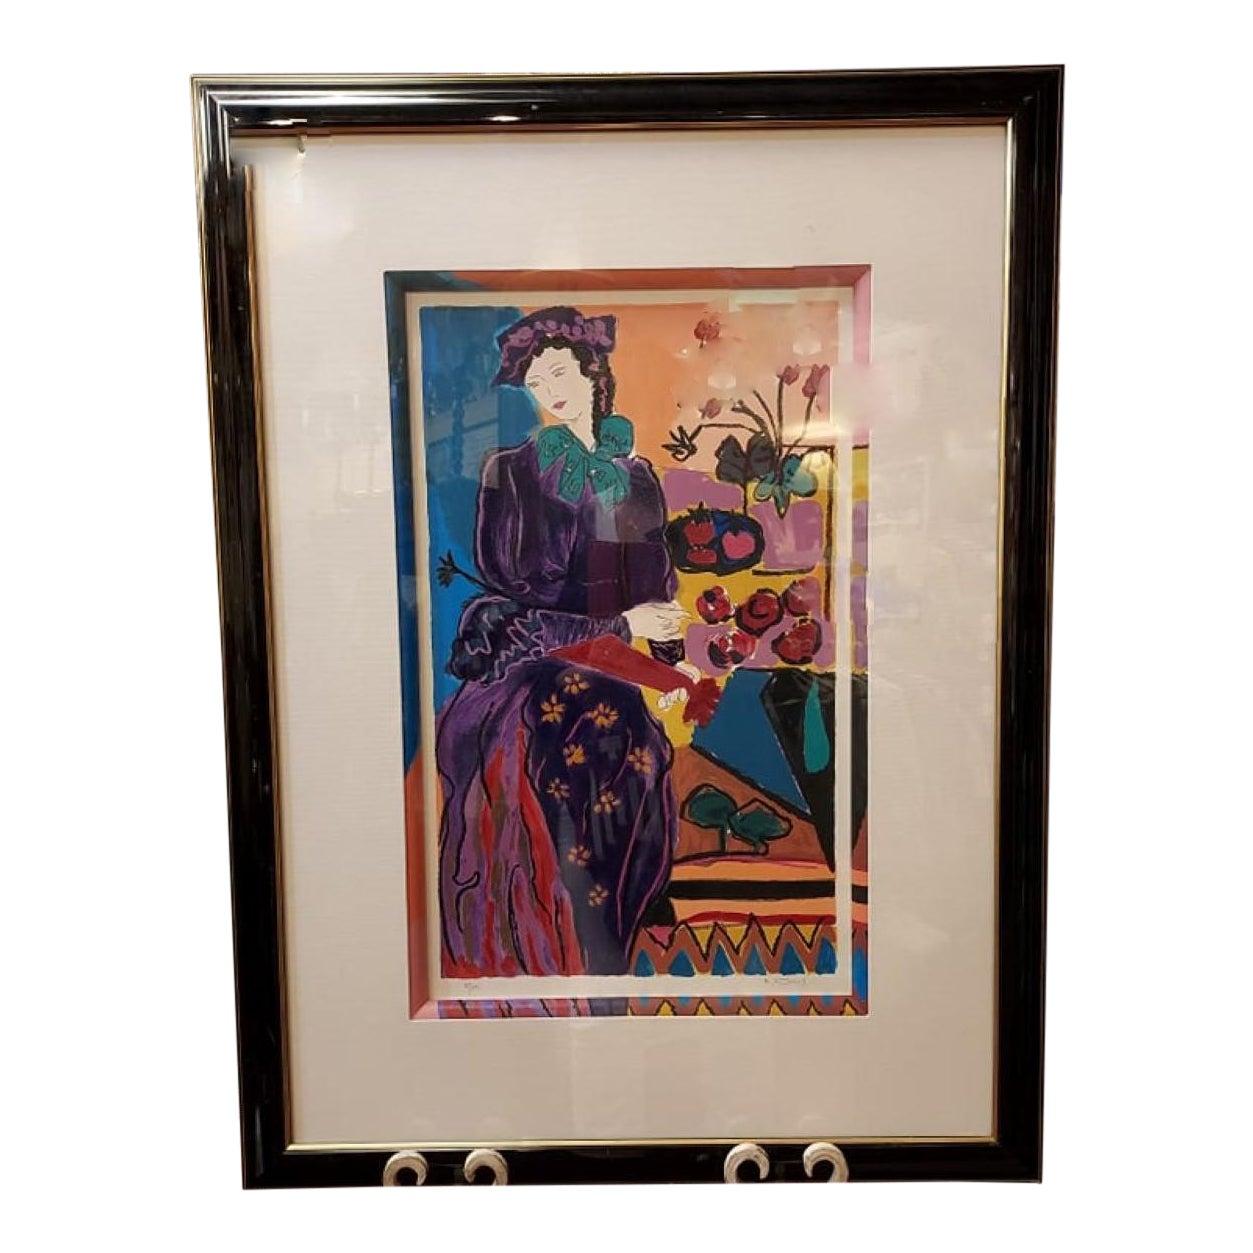 Unknown Figurative Print - B. Cony Limited Edition Signed Numbered Print Framed 